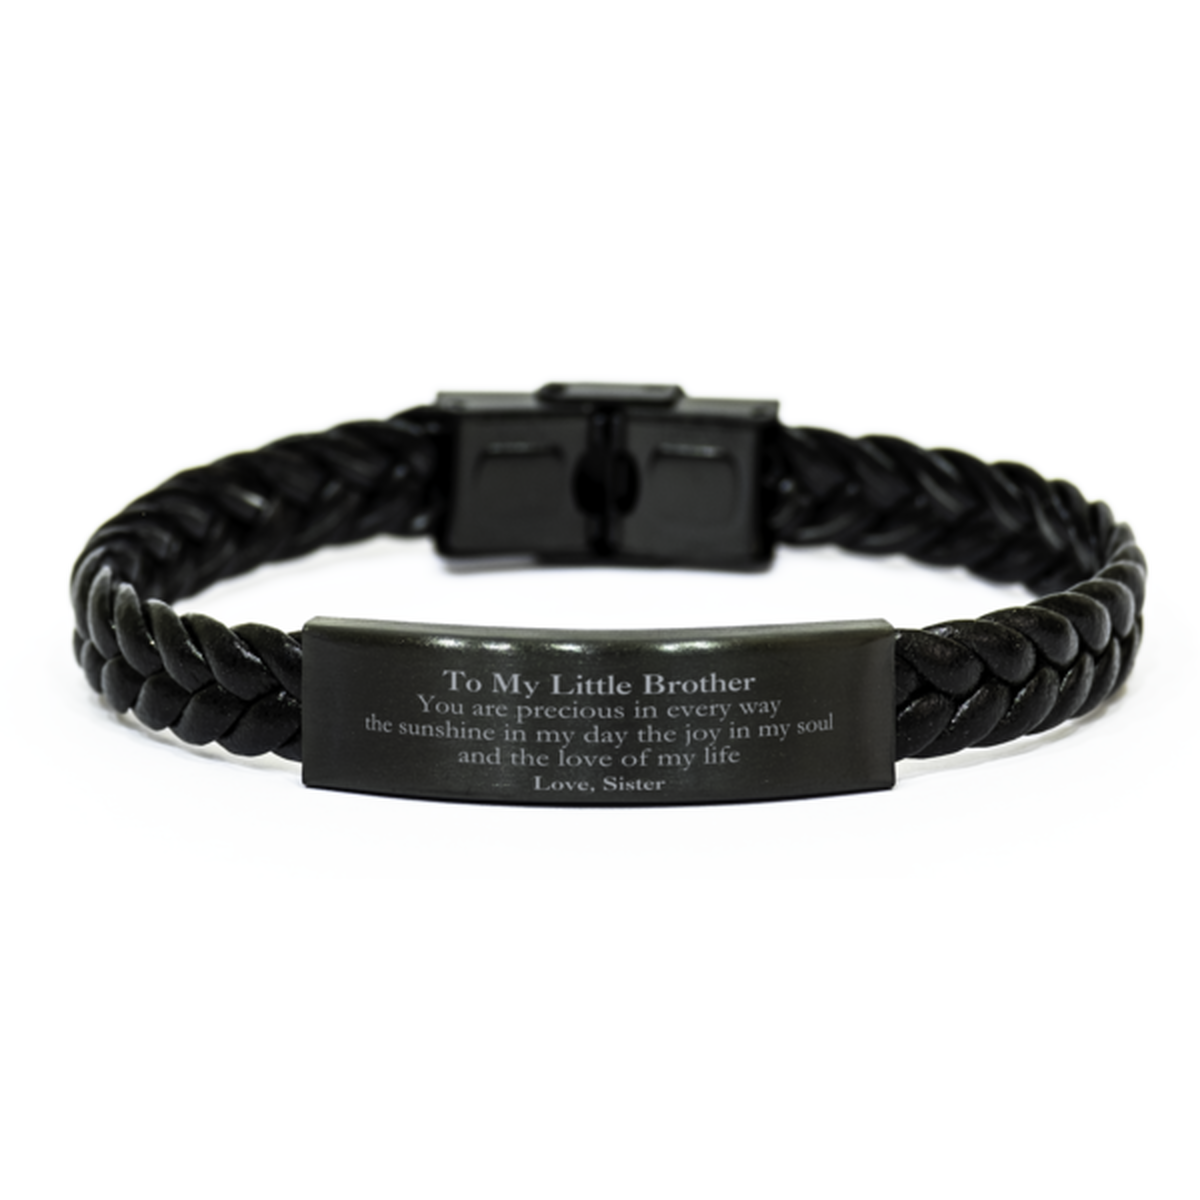 Graduation Gifts for Little Brother Braided Leather Bracelet Present from Sister, Christmas Little Brother Birthday Gifts Little Brother You are precious in every way the sunshine in my day. Love, Sister